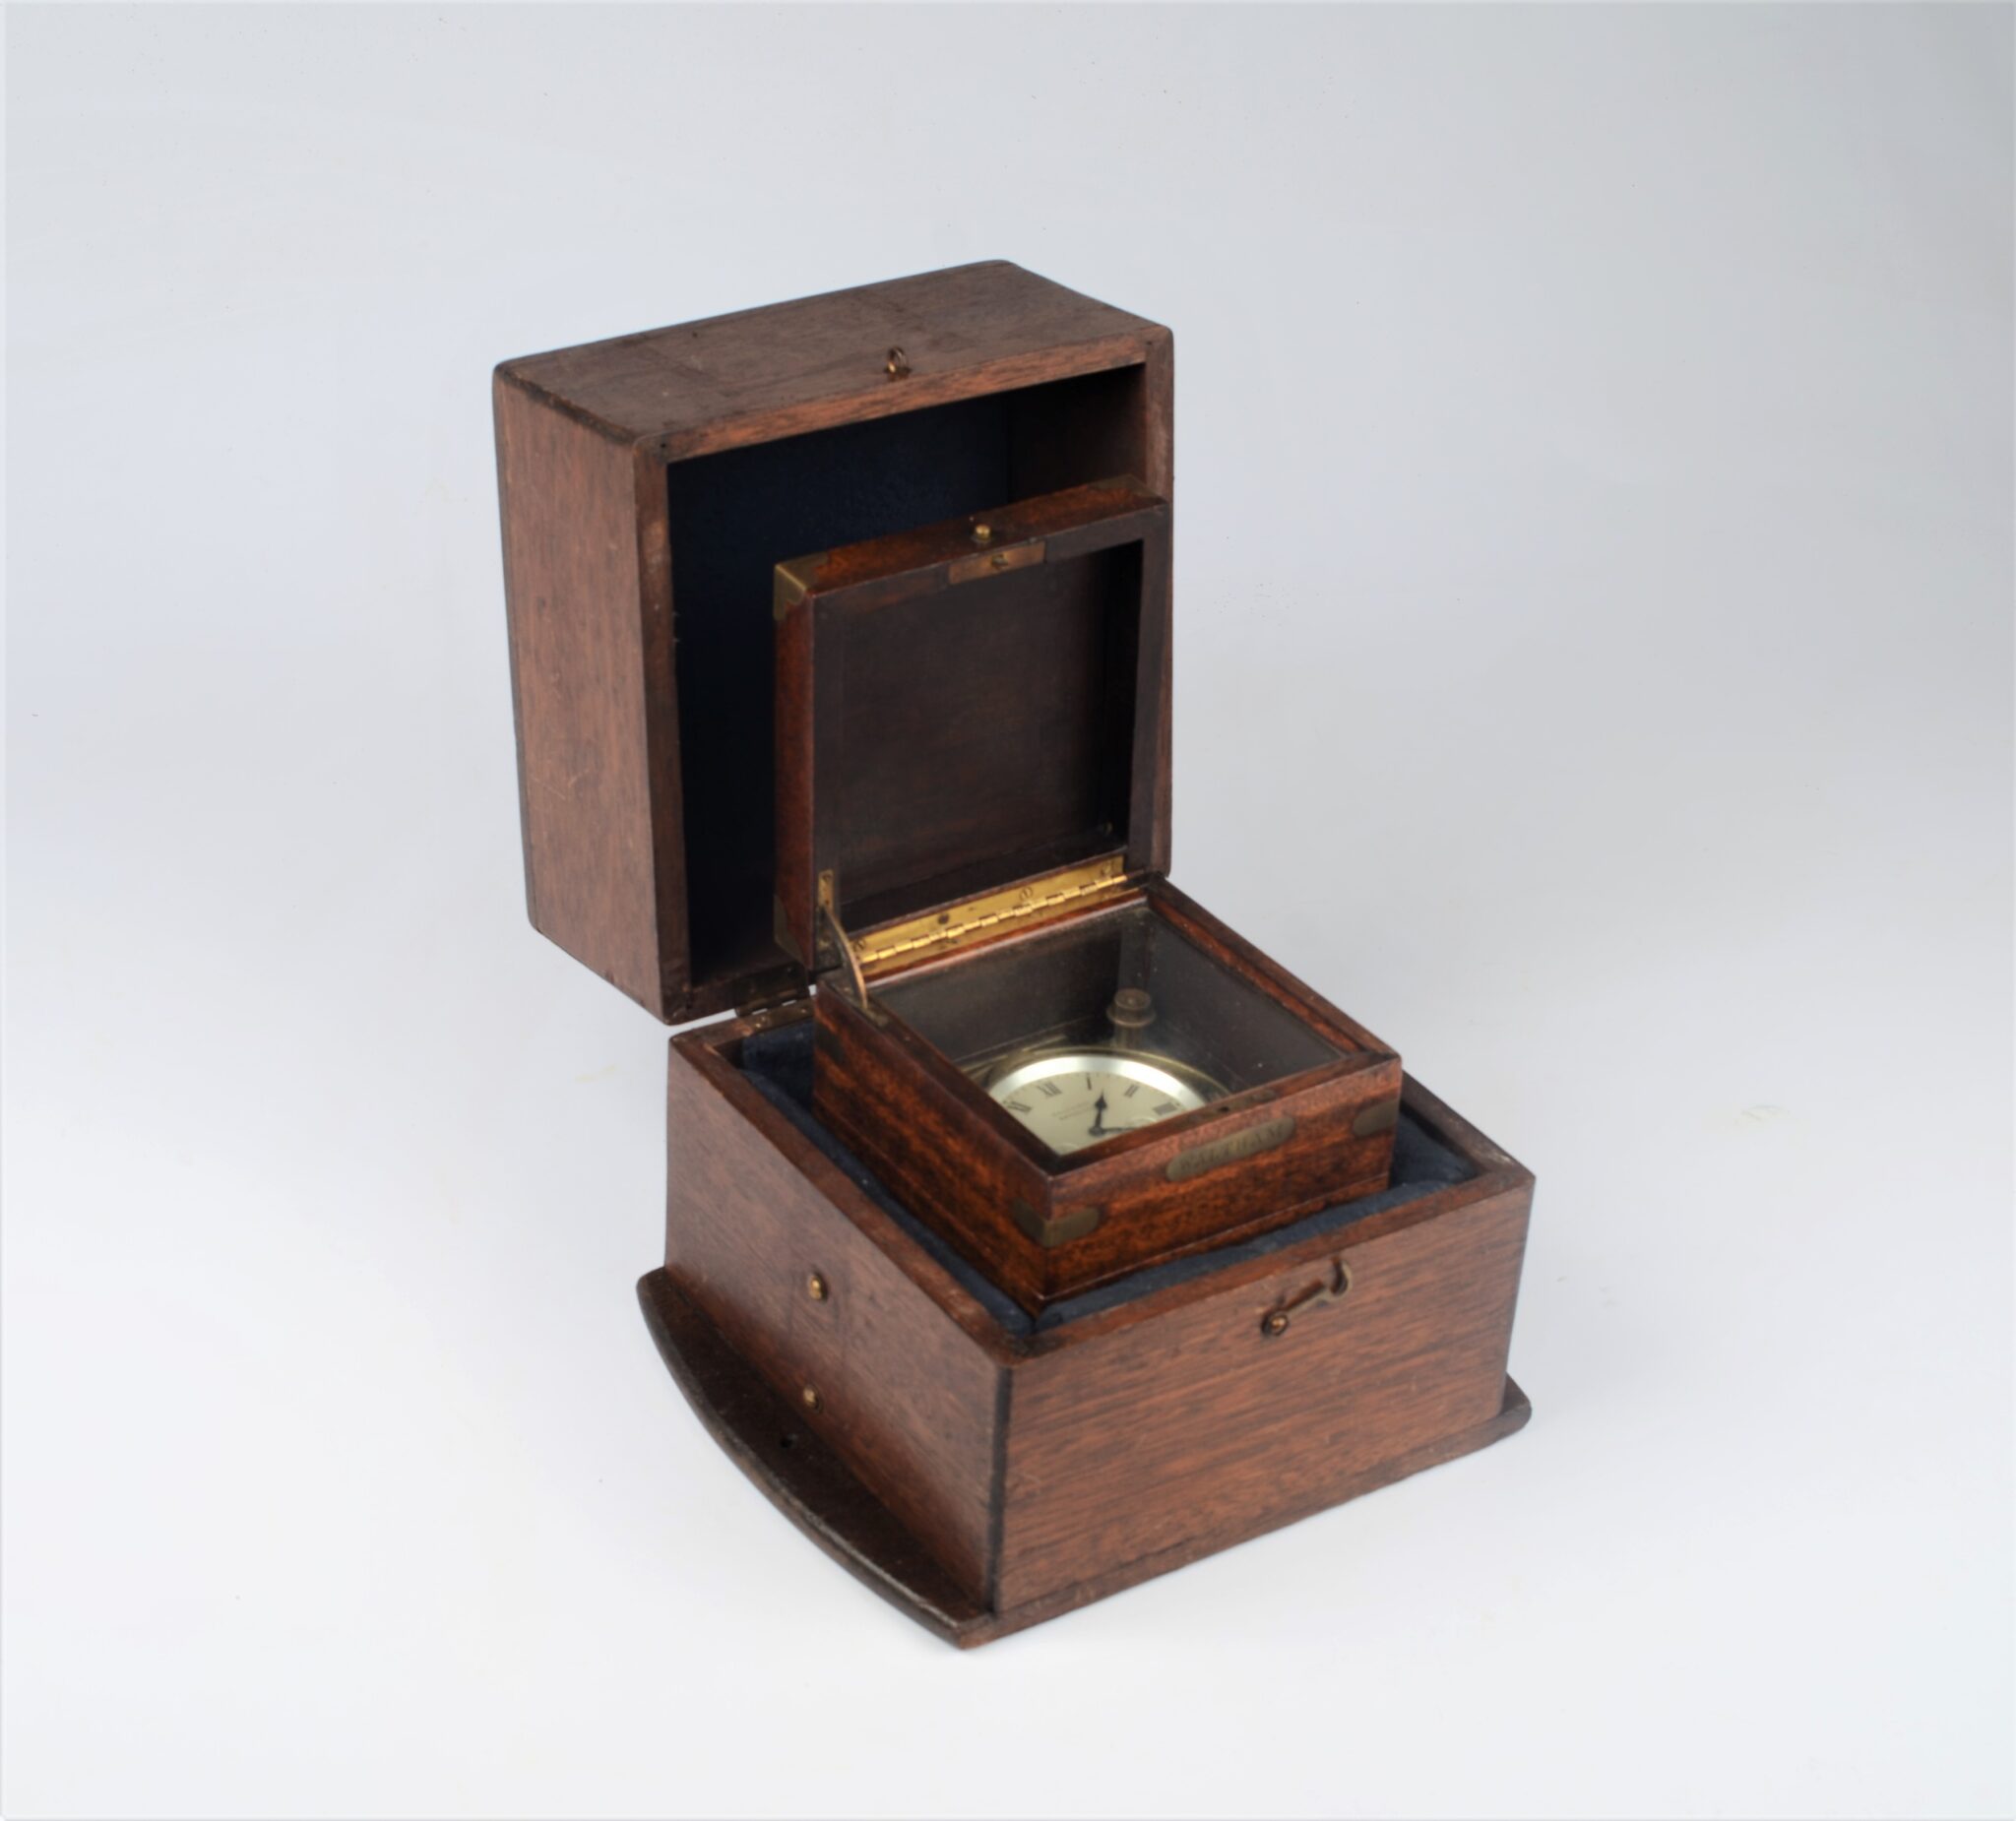 Eigth-days Chronometer with rare carrying case – Waltham, Massachusetts, early 20th century